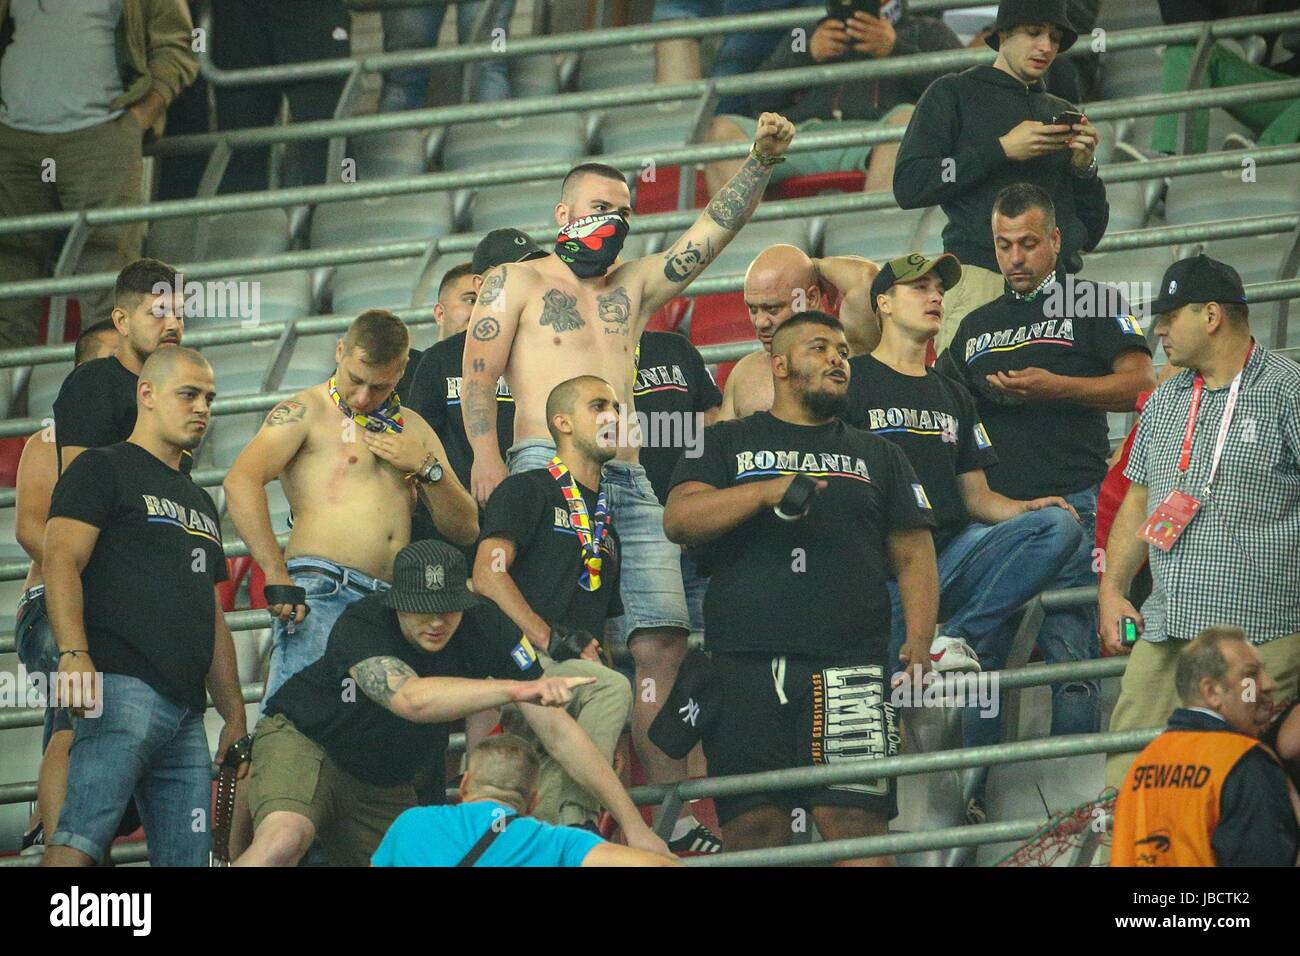 Warsaw, Poland. 10th June, 2017. World Cup 2018 Qualifying Poland vs Romania on June 10, 2017 in Warsaw, Poland   In the picture: romanian hooligans Credit: East News sp. z o.o./Alamy Live News Stock Photo